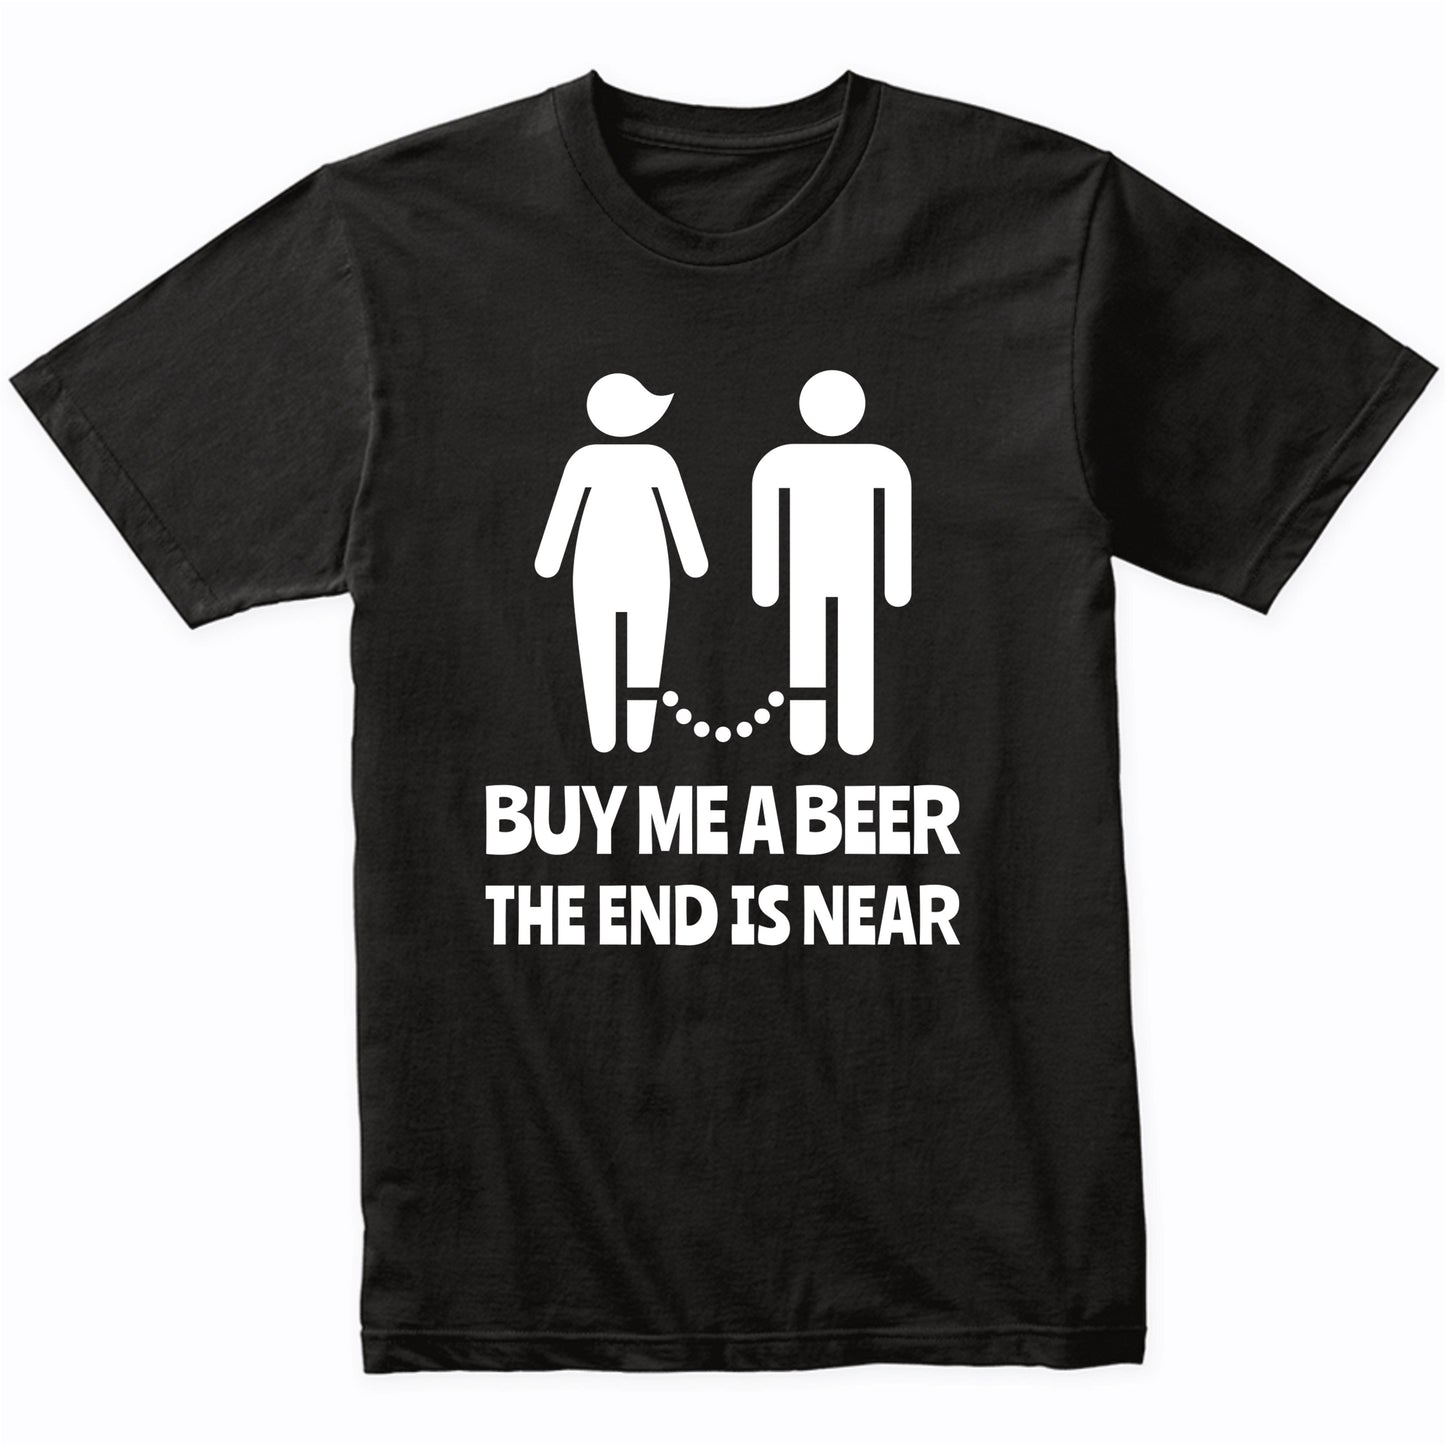 Bachelor Party Shirt - Buy Me A Beer The End Is Near